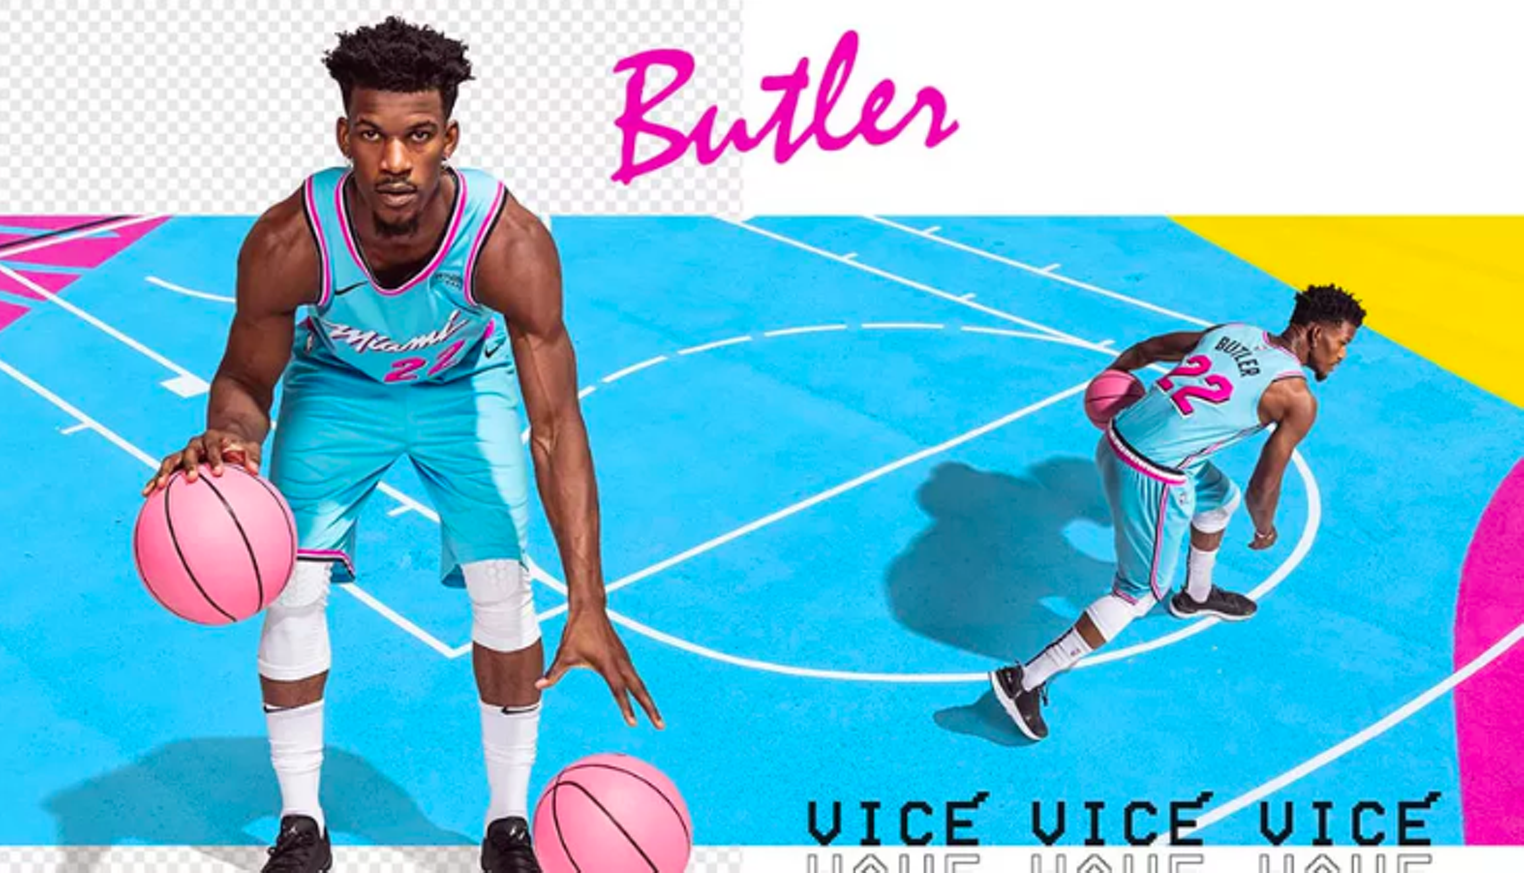 nba blue and pink jersey